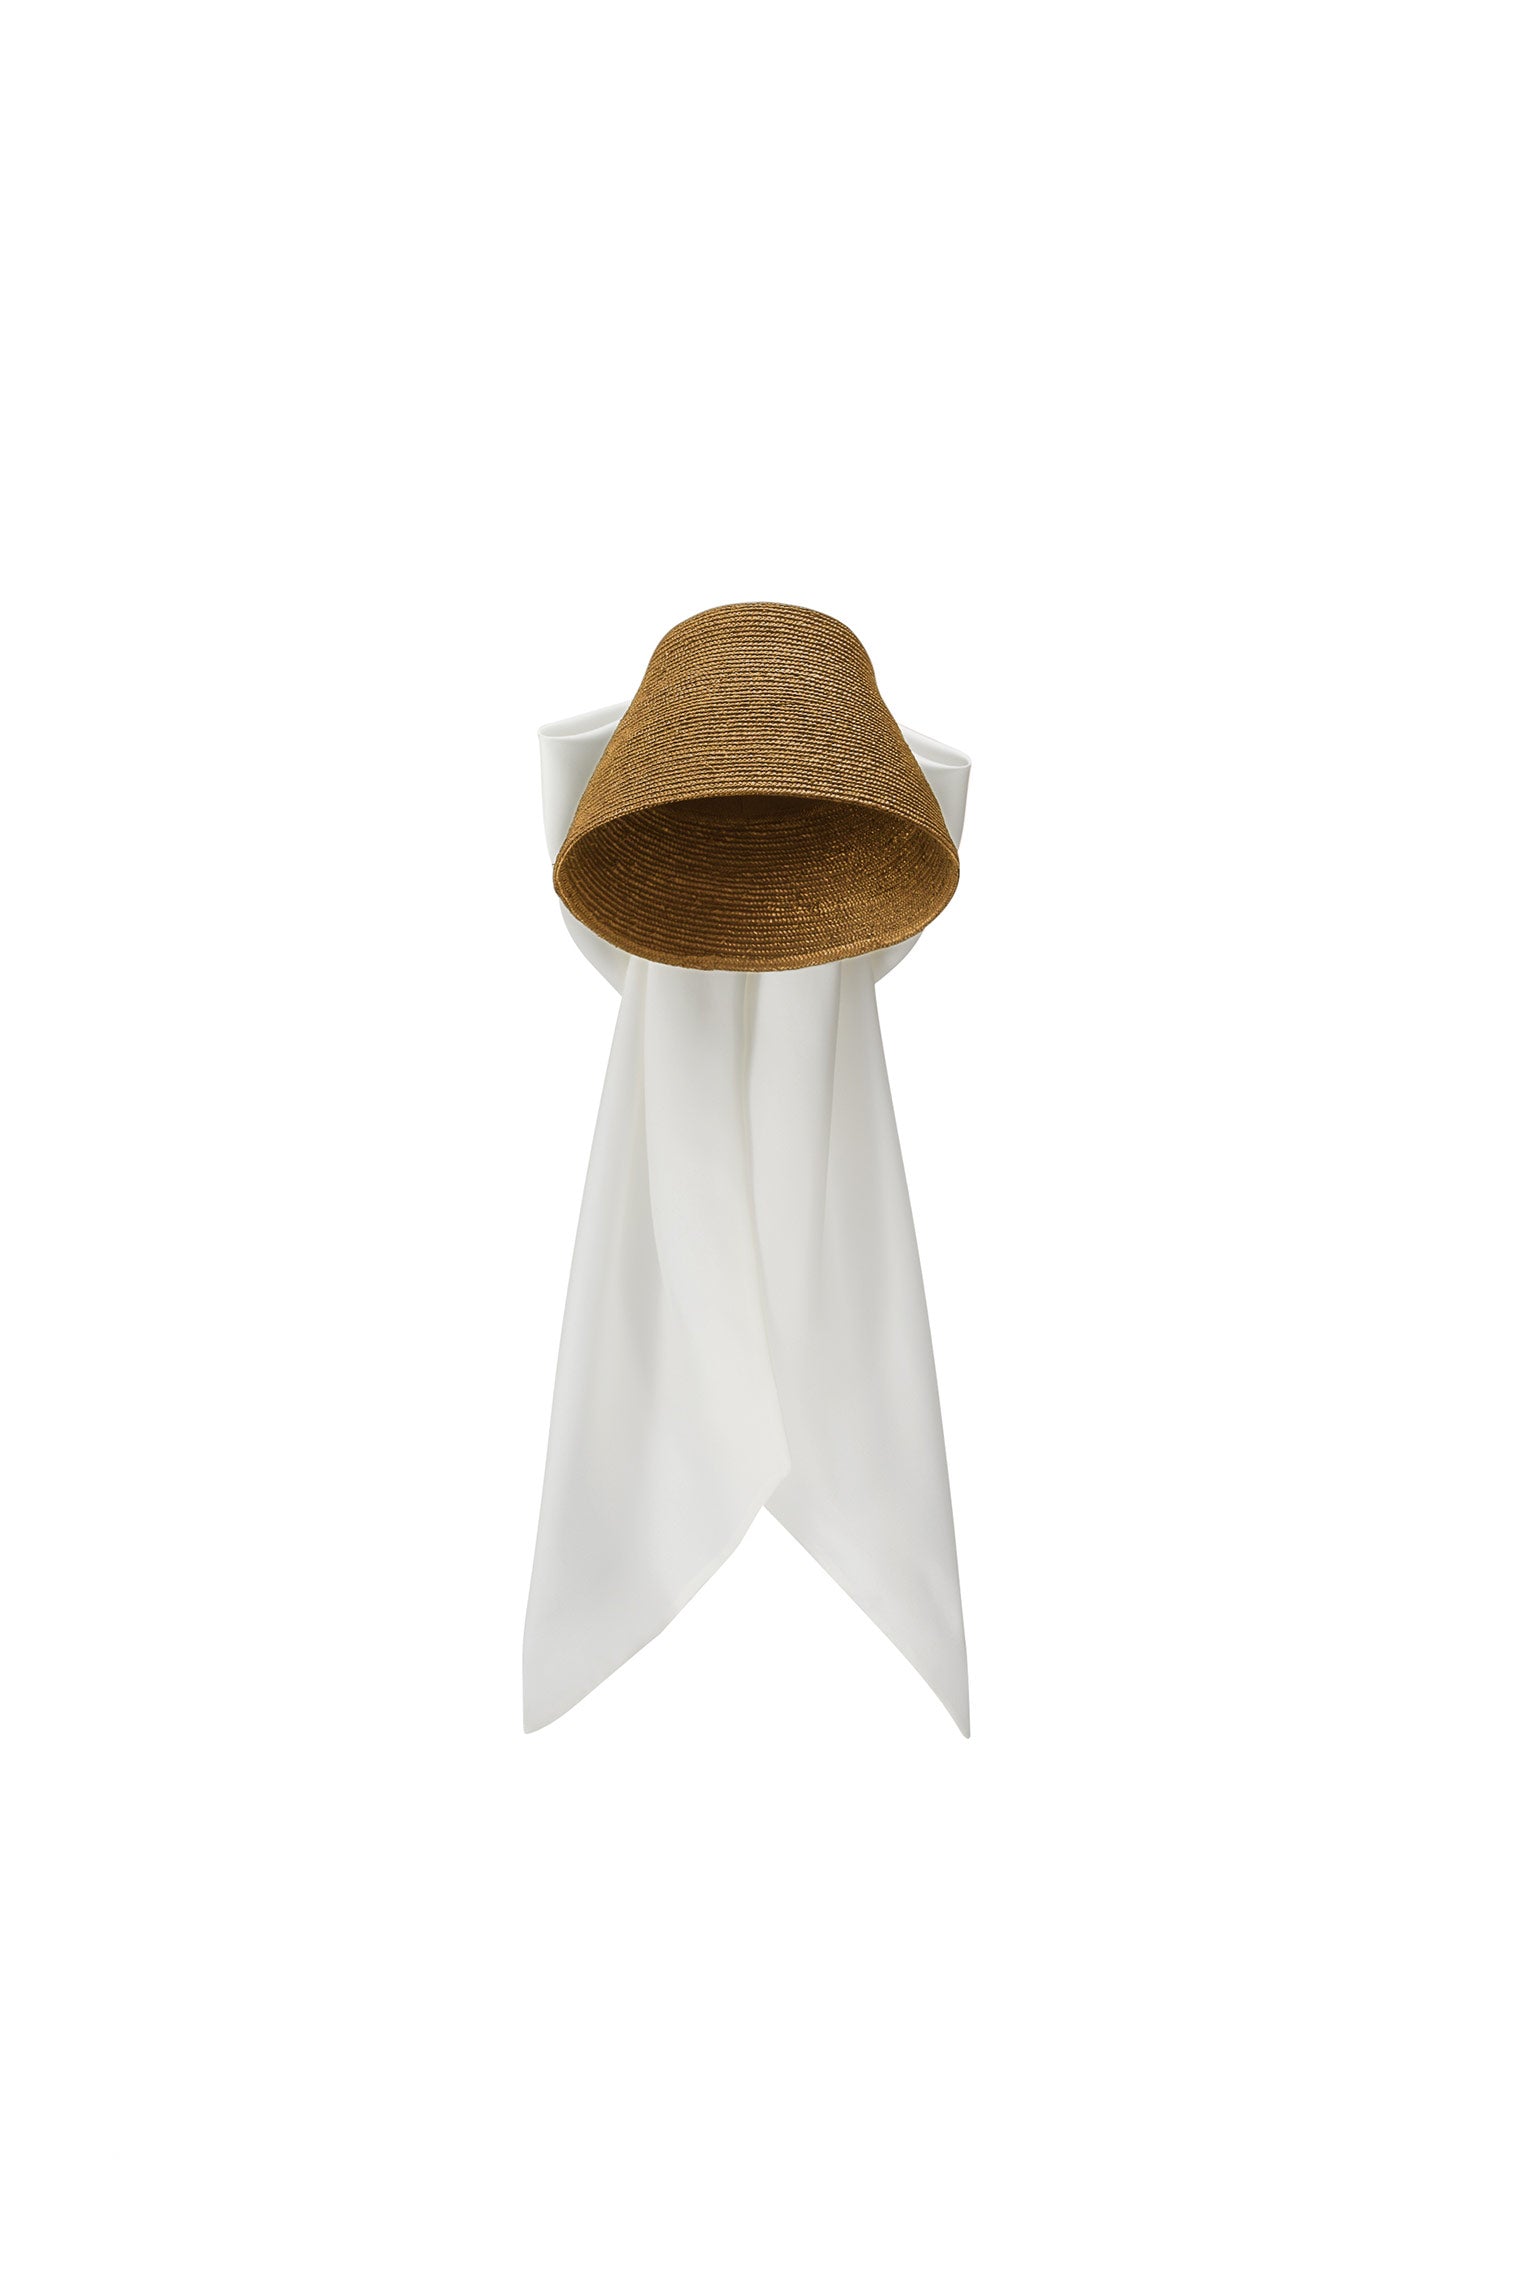 Emma Bucket Hat - Lock Couture by Awon Golding - Lock & Co. Hatters London UK